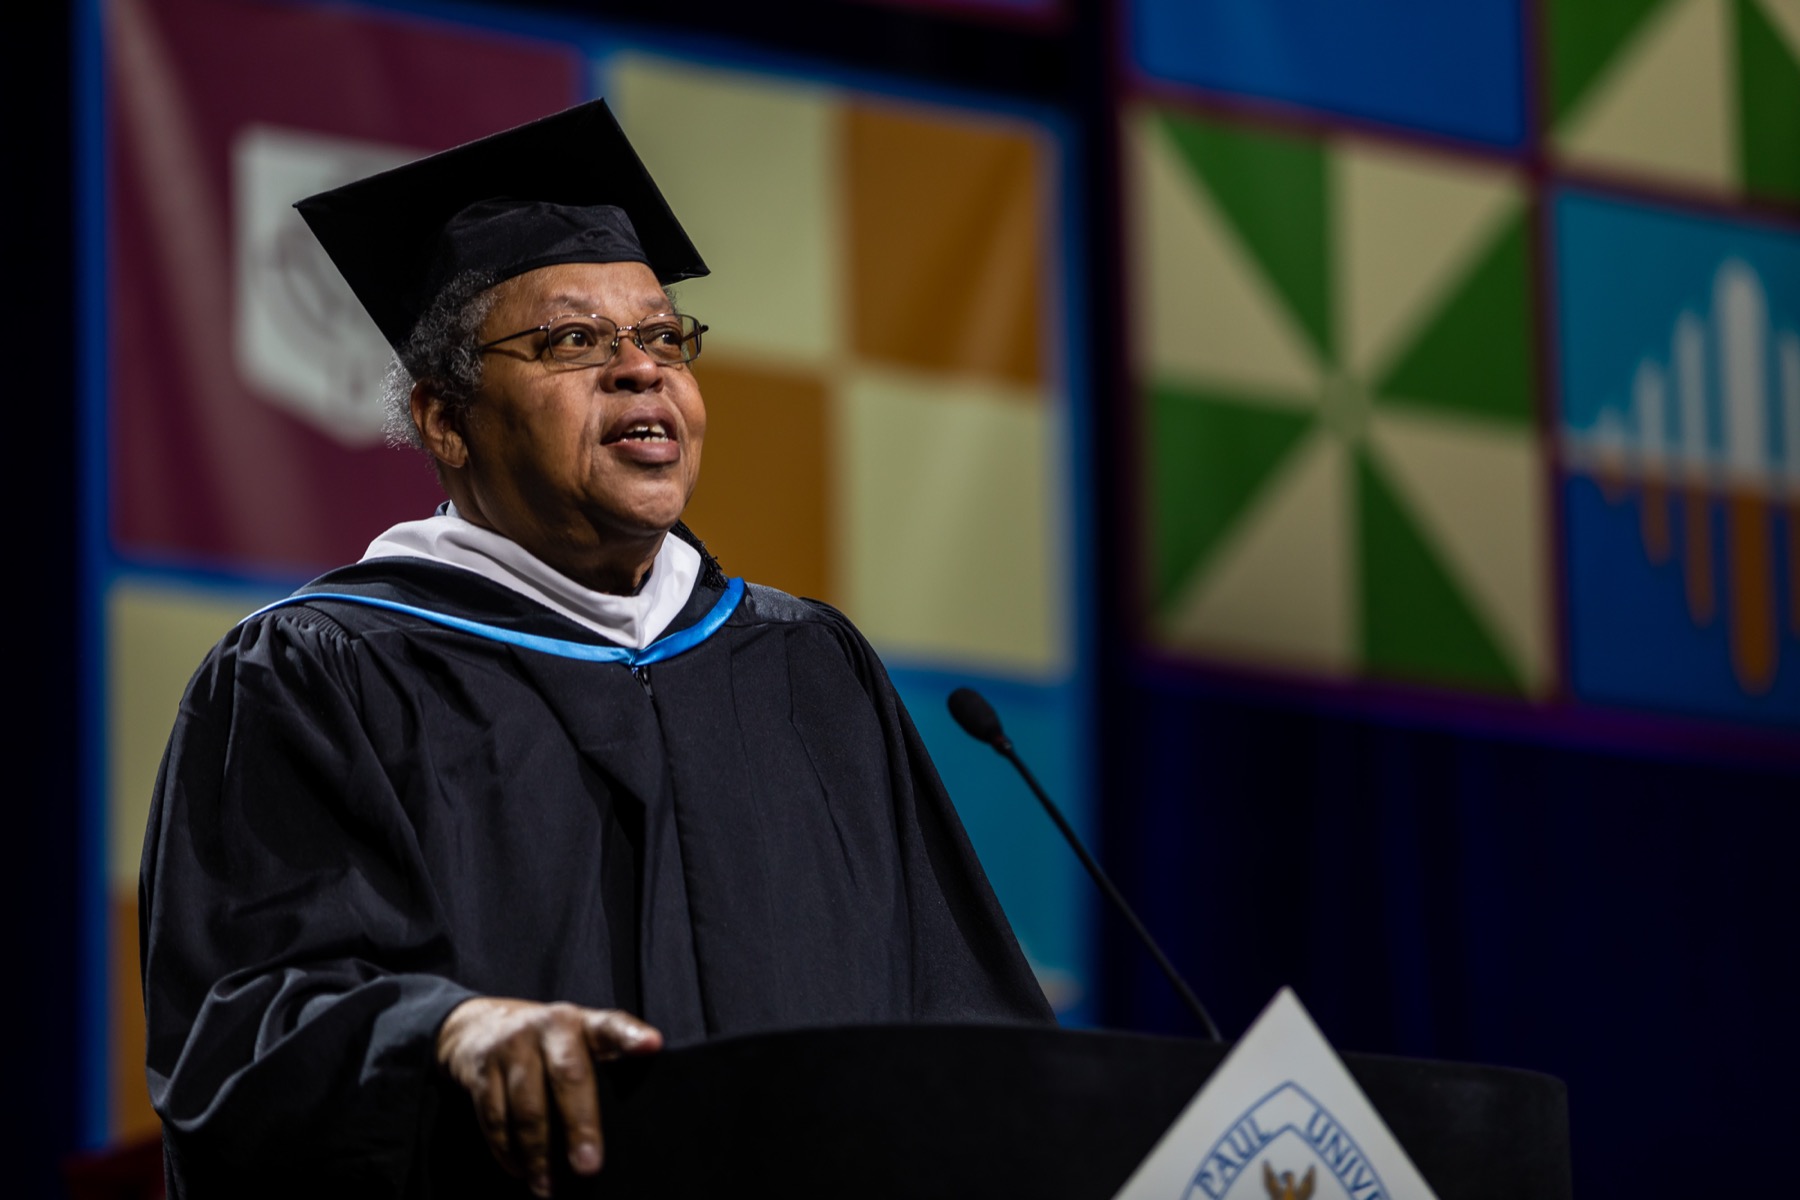 George E. Lewis, musical performer, and composer, addressed the graduates of the School of Music and College of Science and Health.